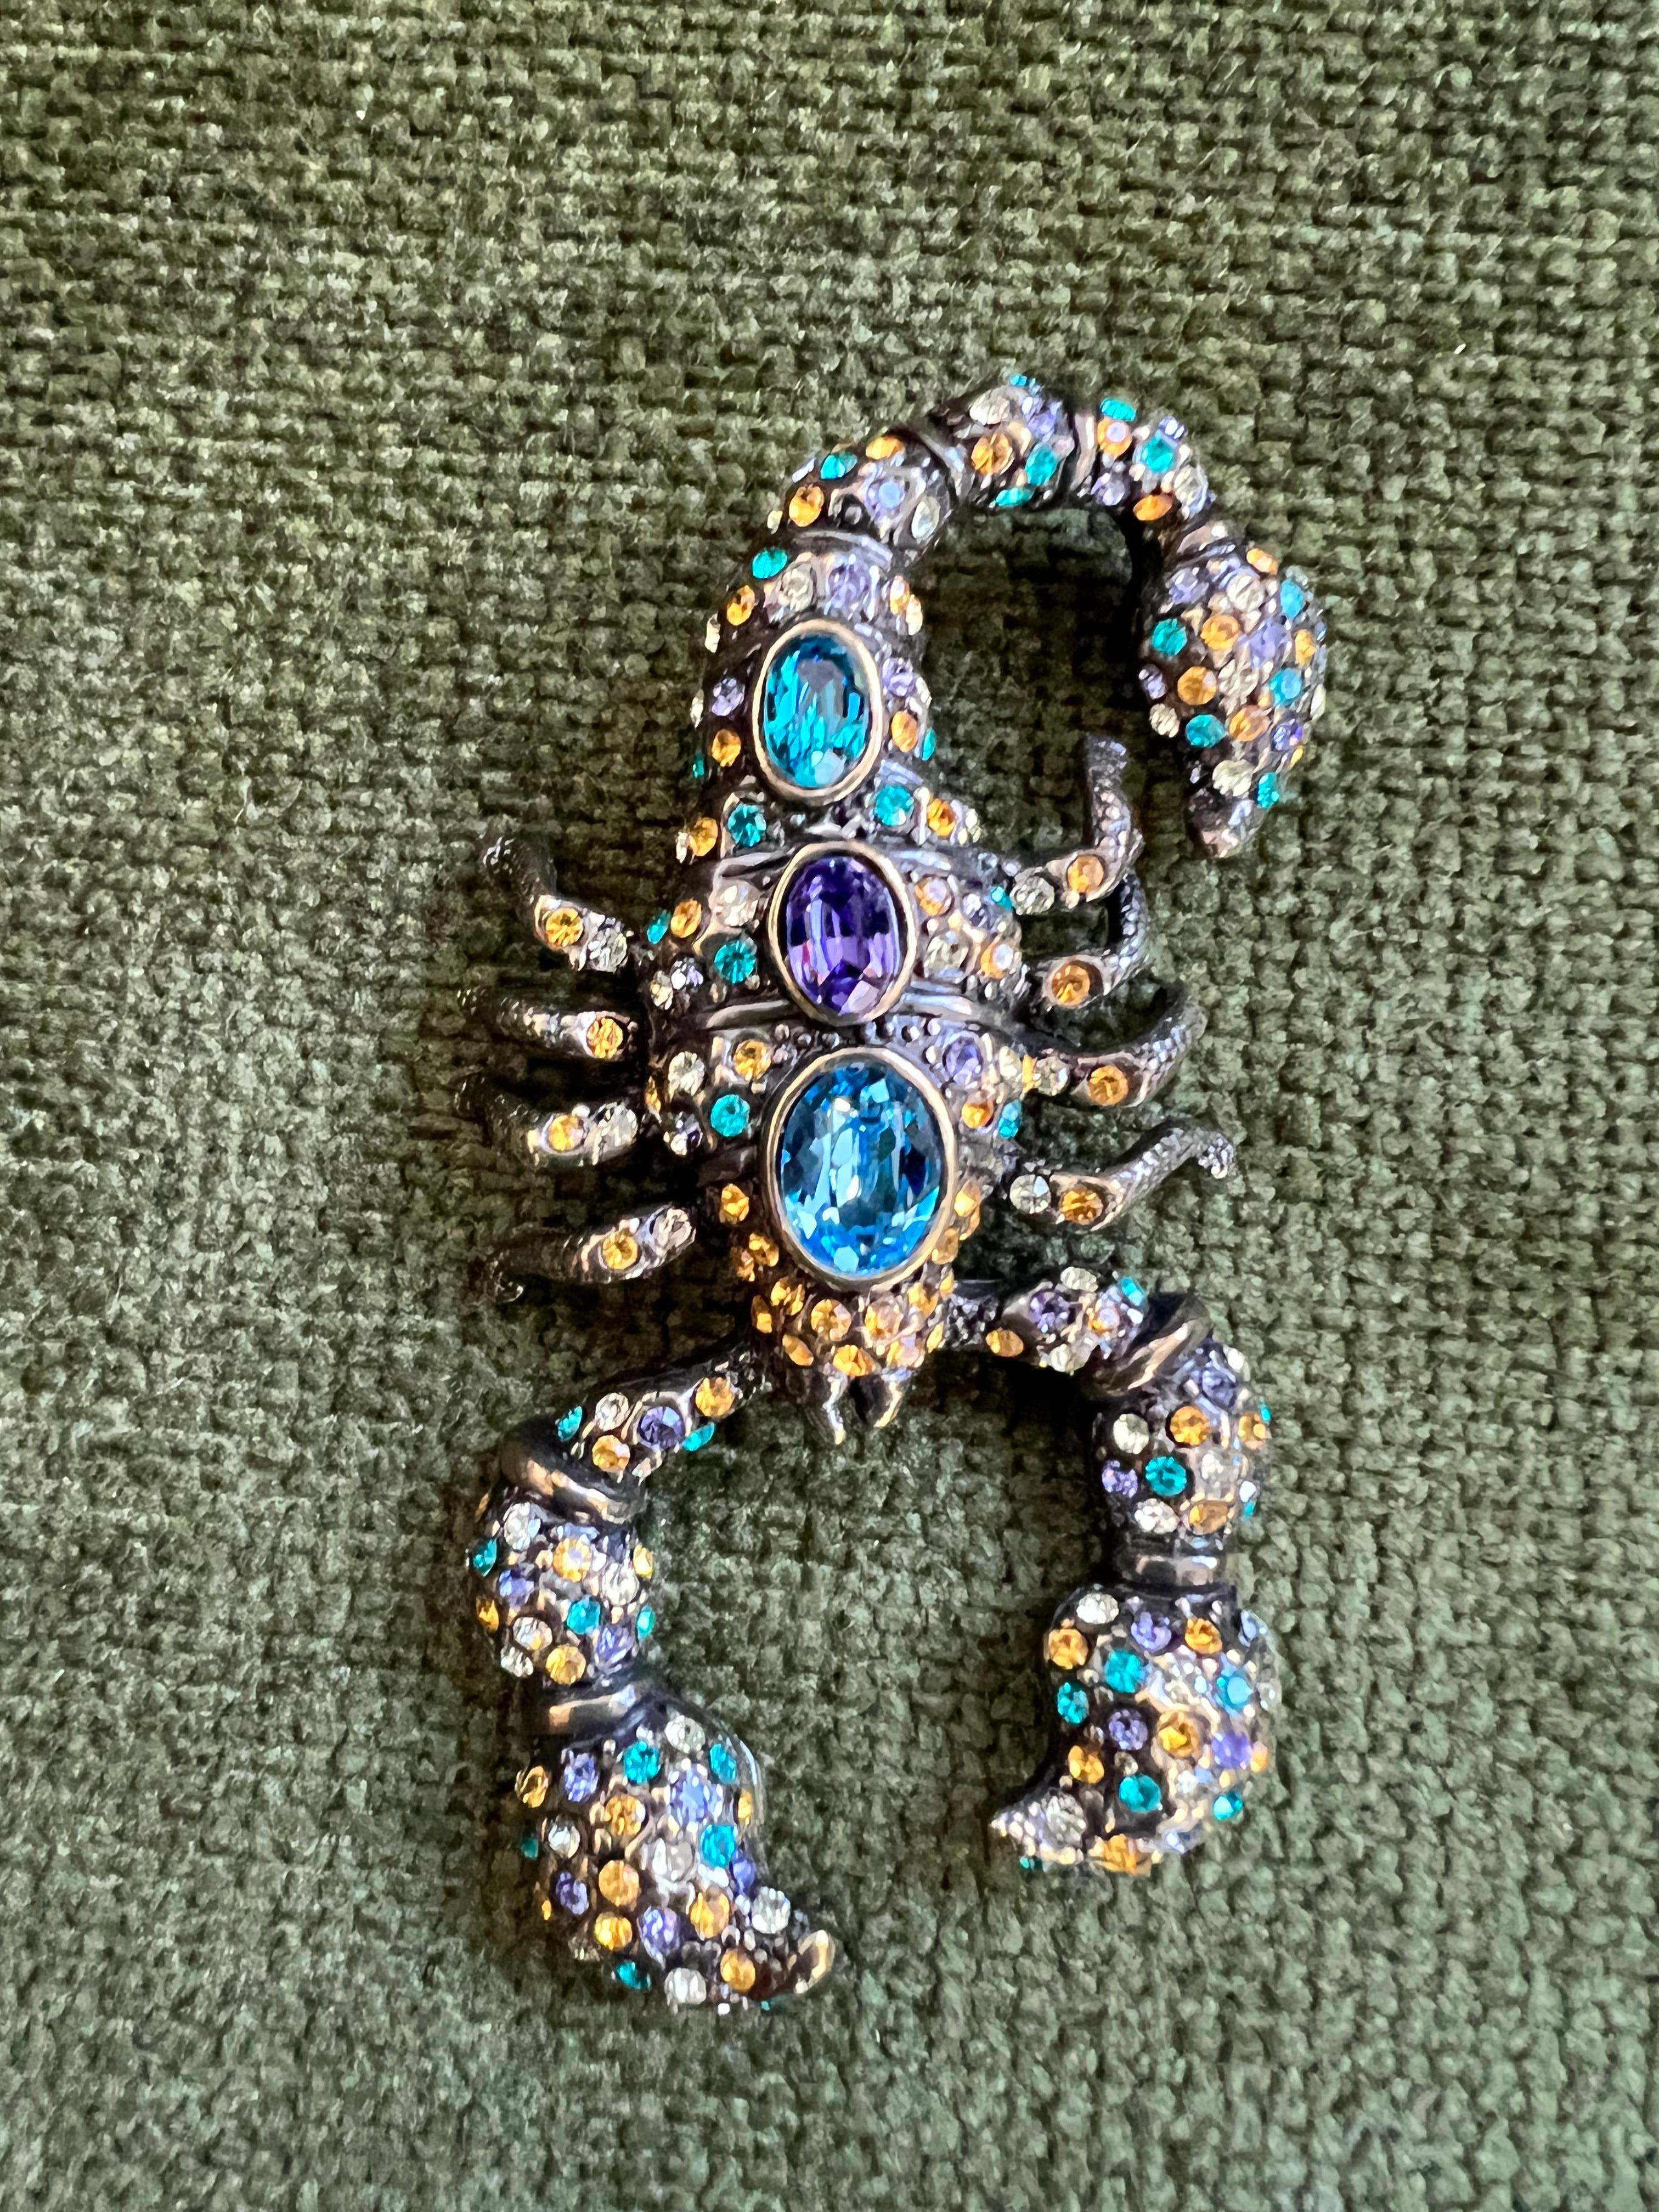 “007 Whisky Scorpion” brooch
Bochic red carpet bijoux jewlery, from the “IKON” private collection. 
Inspired by James Bond drinking game in “Sky Fall “ the colors chosen from the sunset at fethiye beach turkey.
Aqua blue, topaz blue, honey gold,